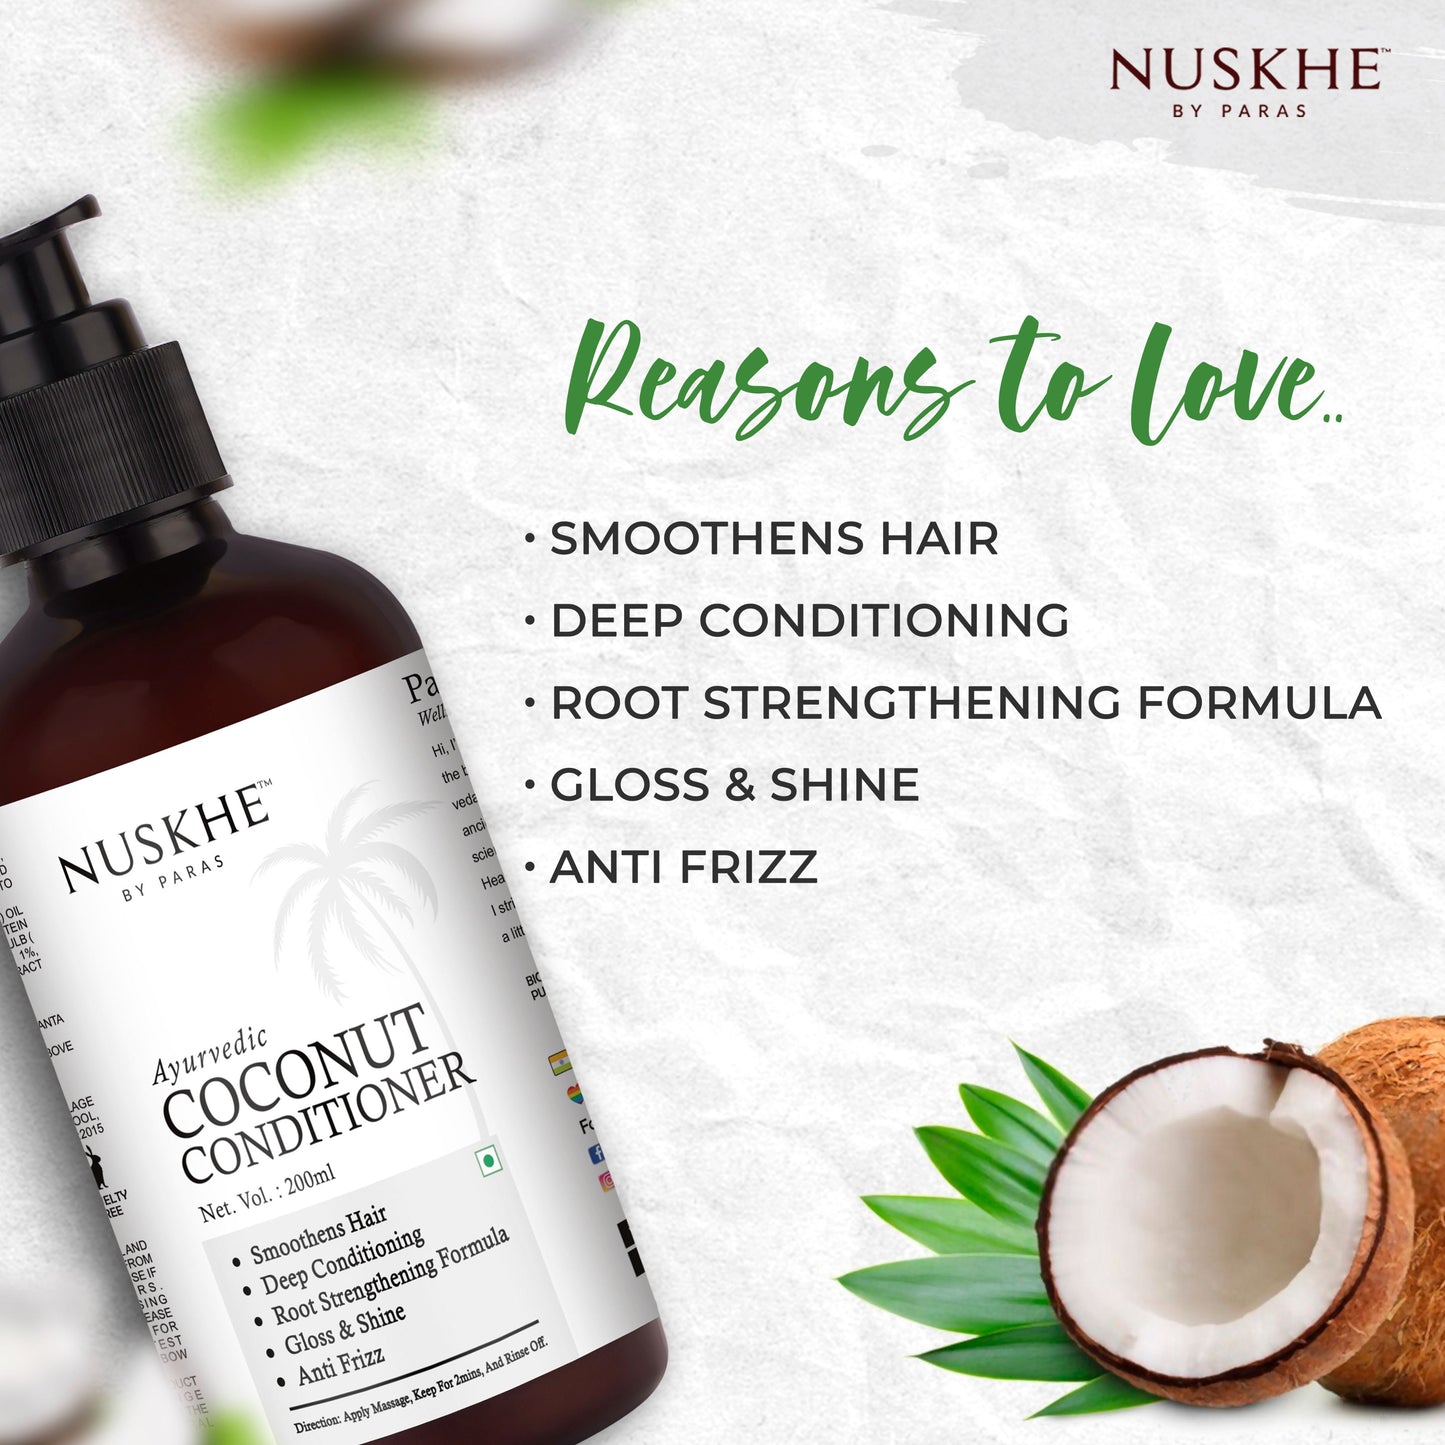 Nuskhe By Paras Ayurvedic Coconut Conditioner with Avocoda Oil for Smoothens Hair -200ml